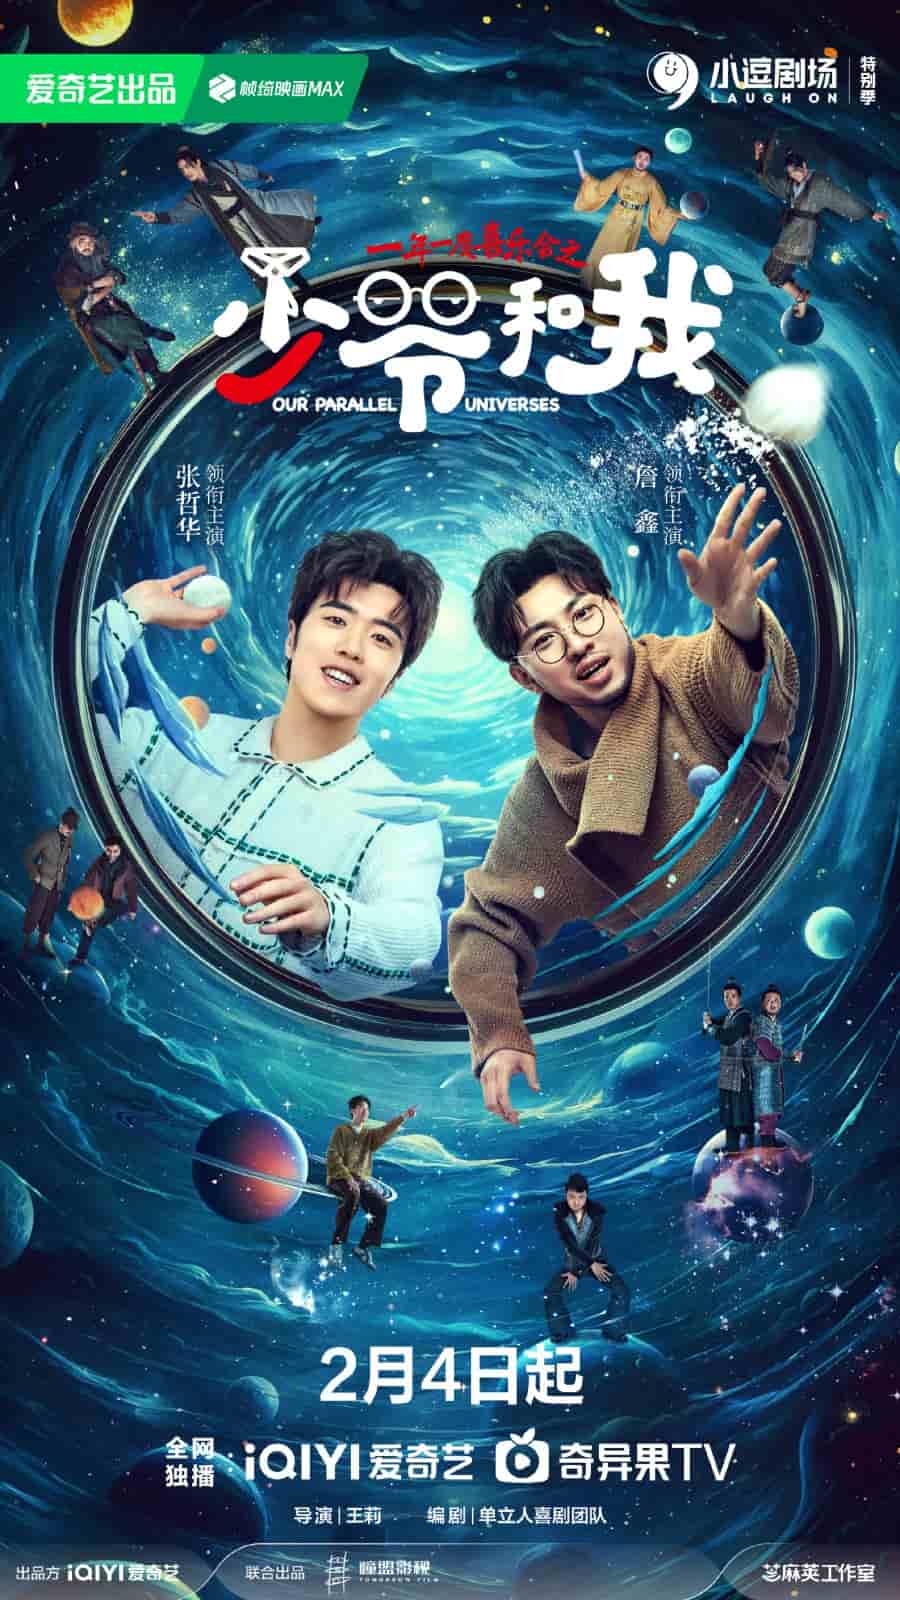 Our Parallel Universes - Sinopsis, Pemain, OST, Episode, Review